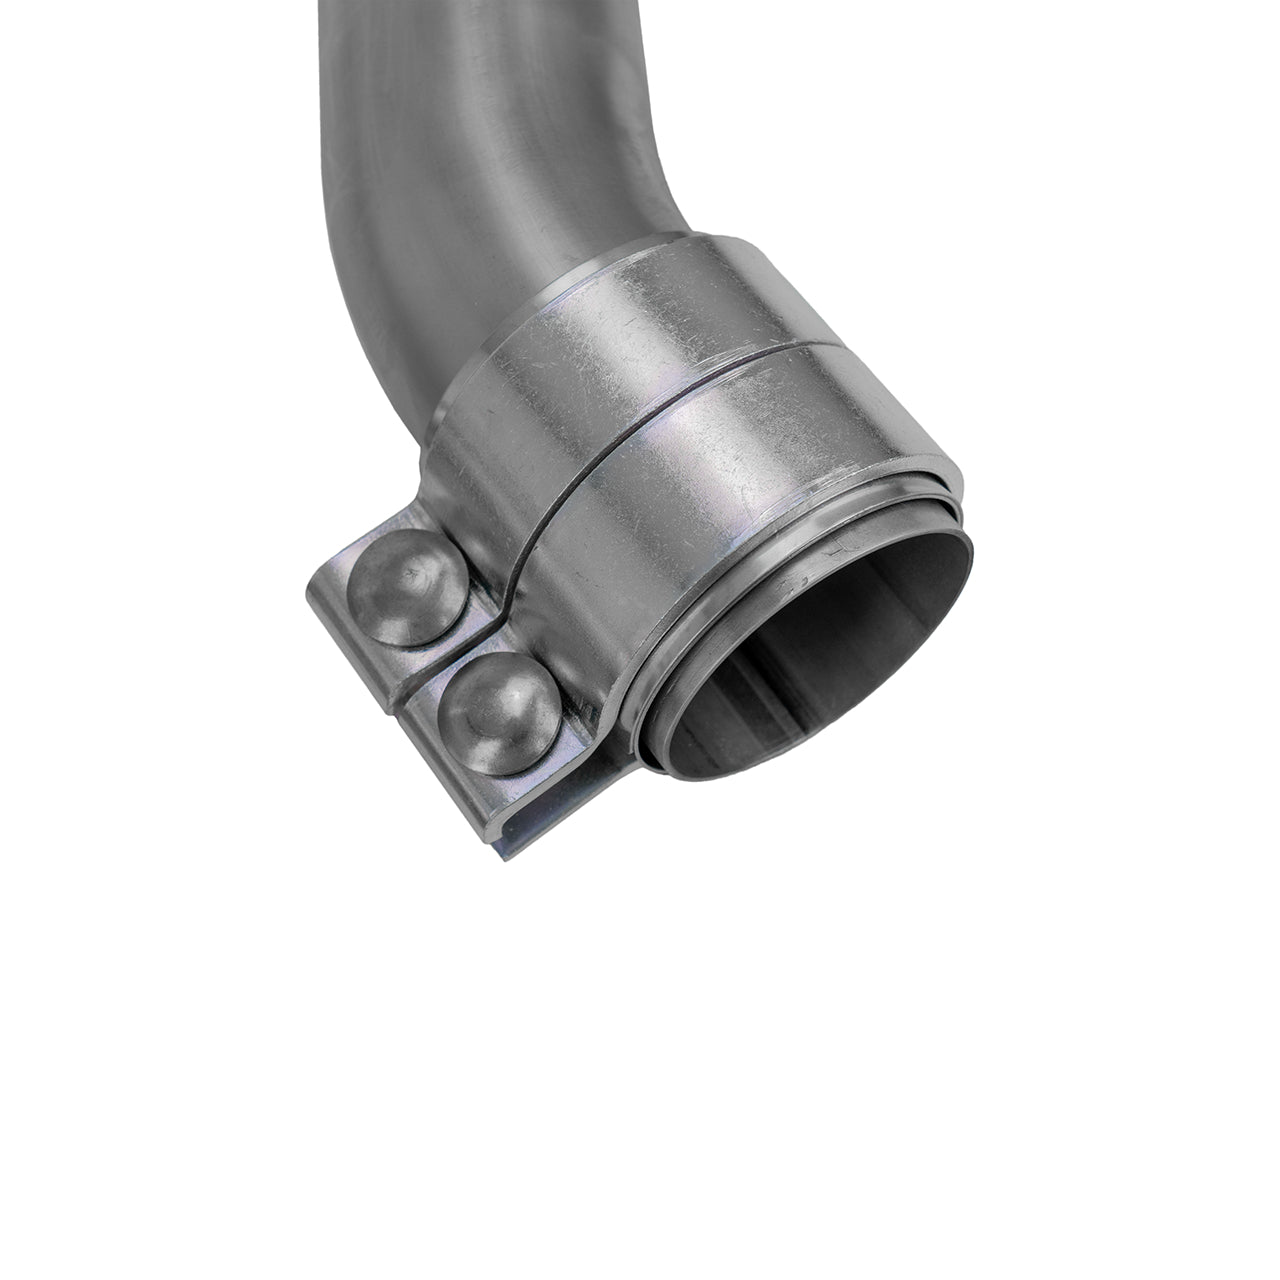 Bull-X Non-Resonated Middendemper Replacement Pipes Audi RS4 + RS5 B9 2.9TFSI 450HP